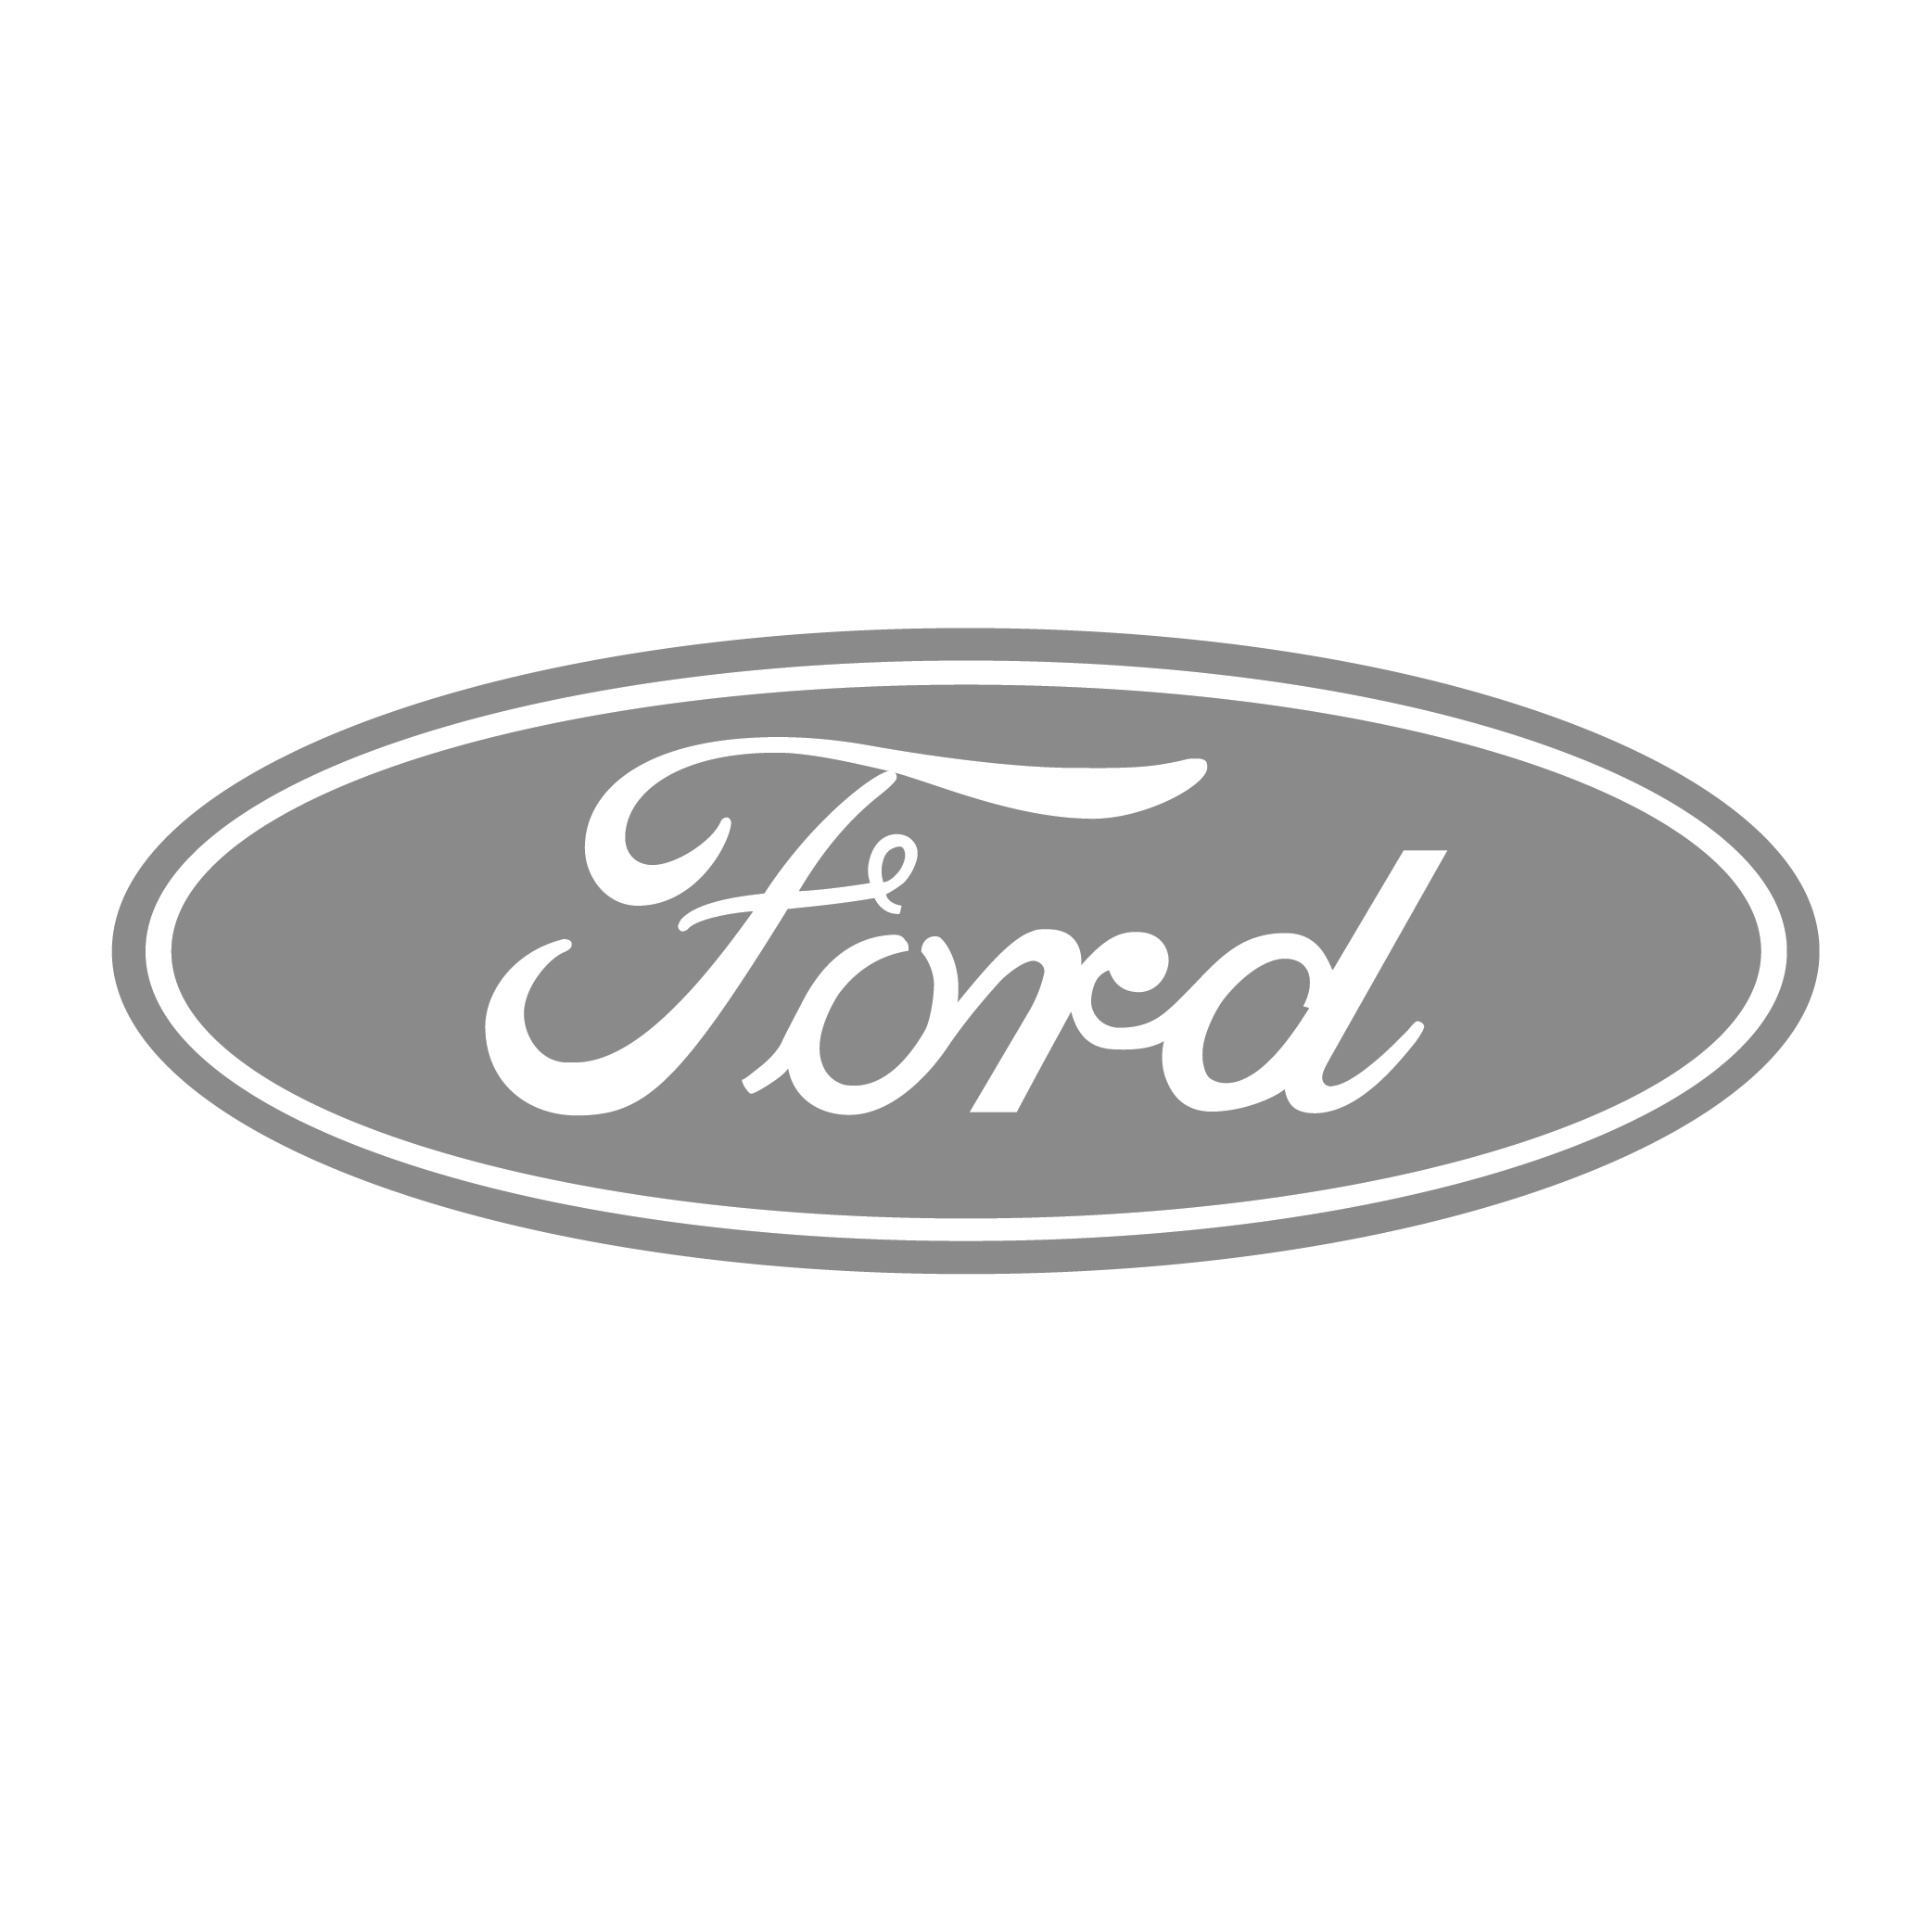 Ford-01-2